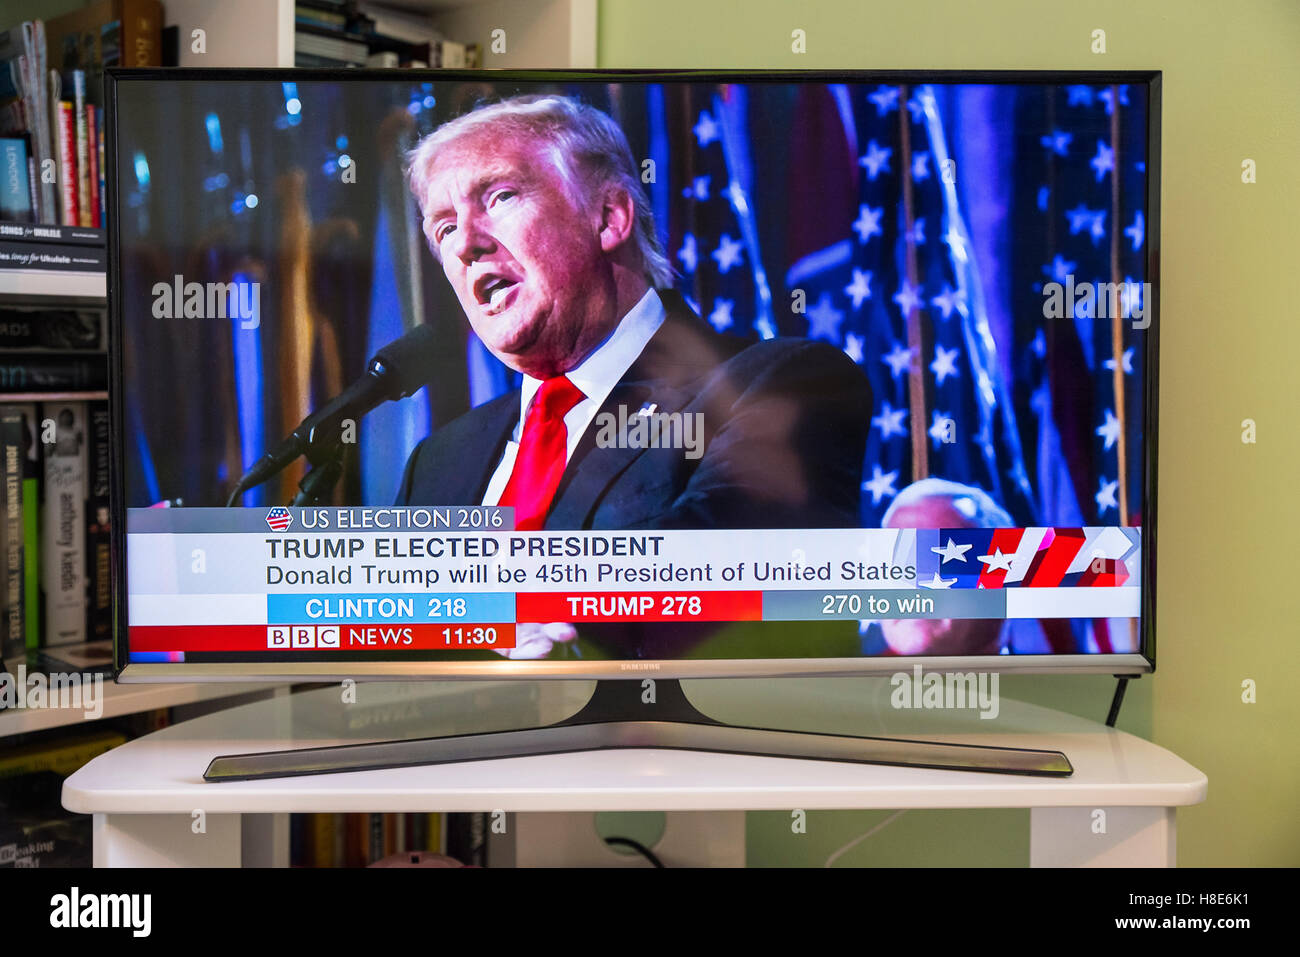 UK - NOV 9TH 2016: A shot of a TV showing the BBC News channel with live  breaking news that Donald Trump is elected President Stock Photo - Alamy